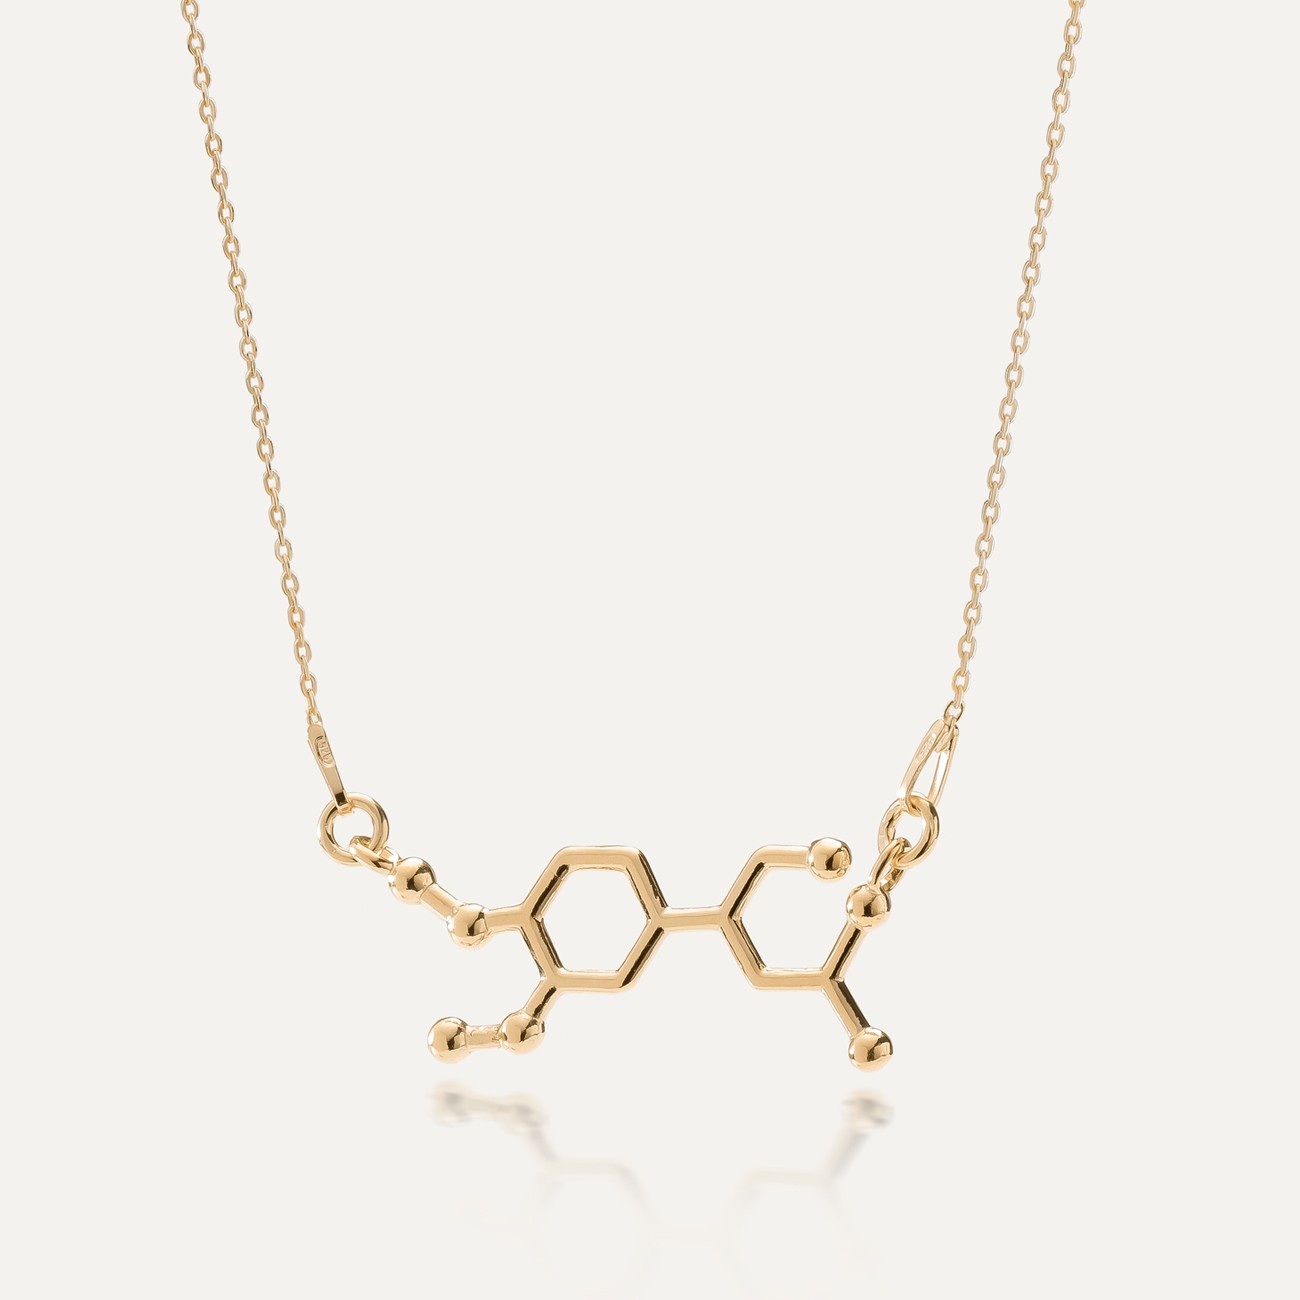 NECKLACE VITAMIN C CHEMICAL FORMULA, STERLING SILVER 925